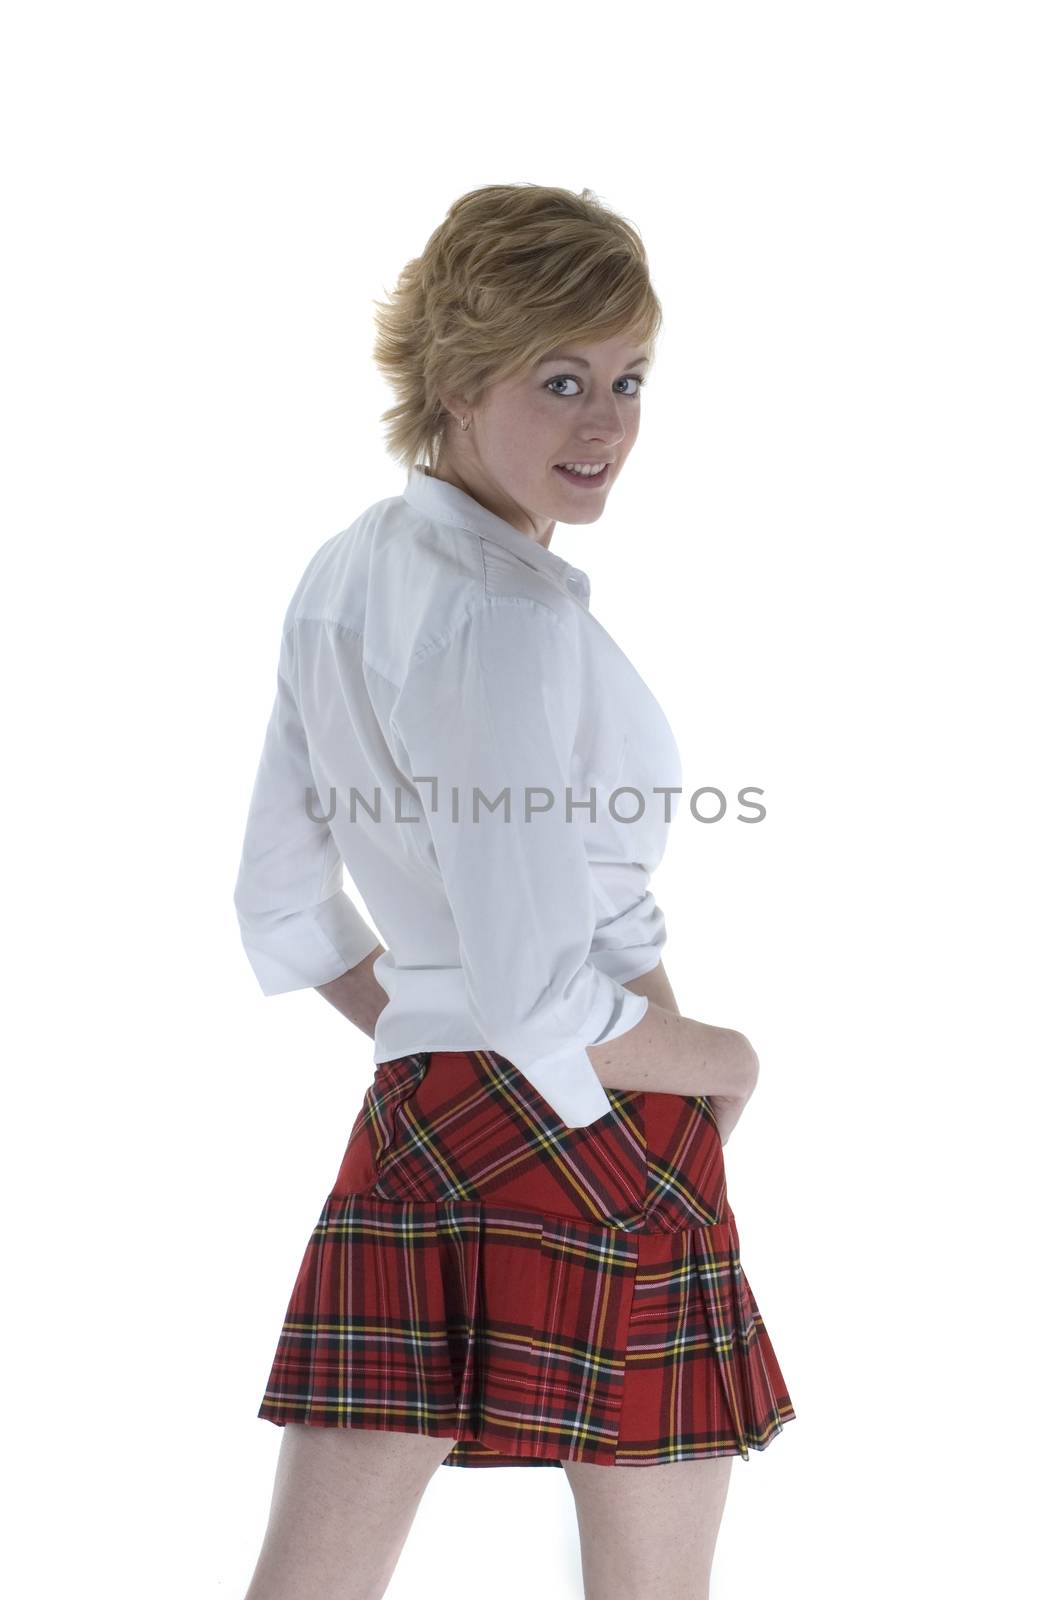 An attractive blonde woman in a tartan skirt and white blouse